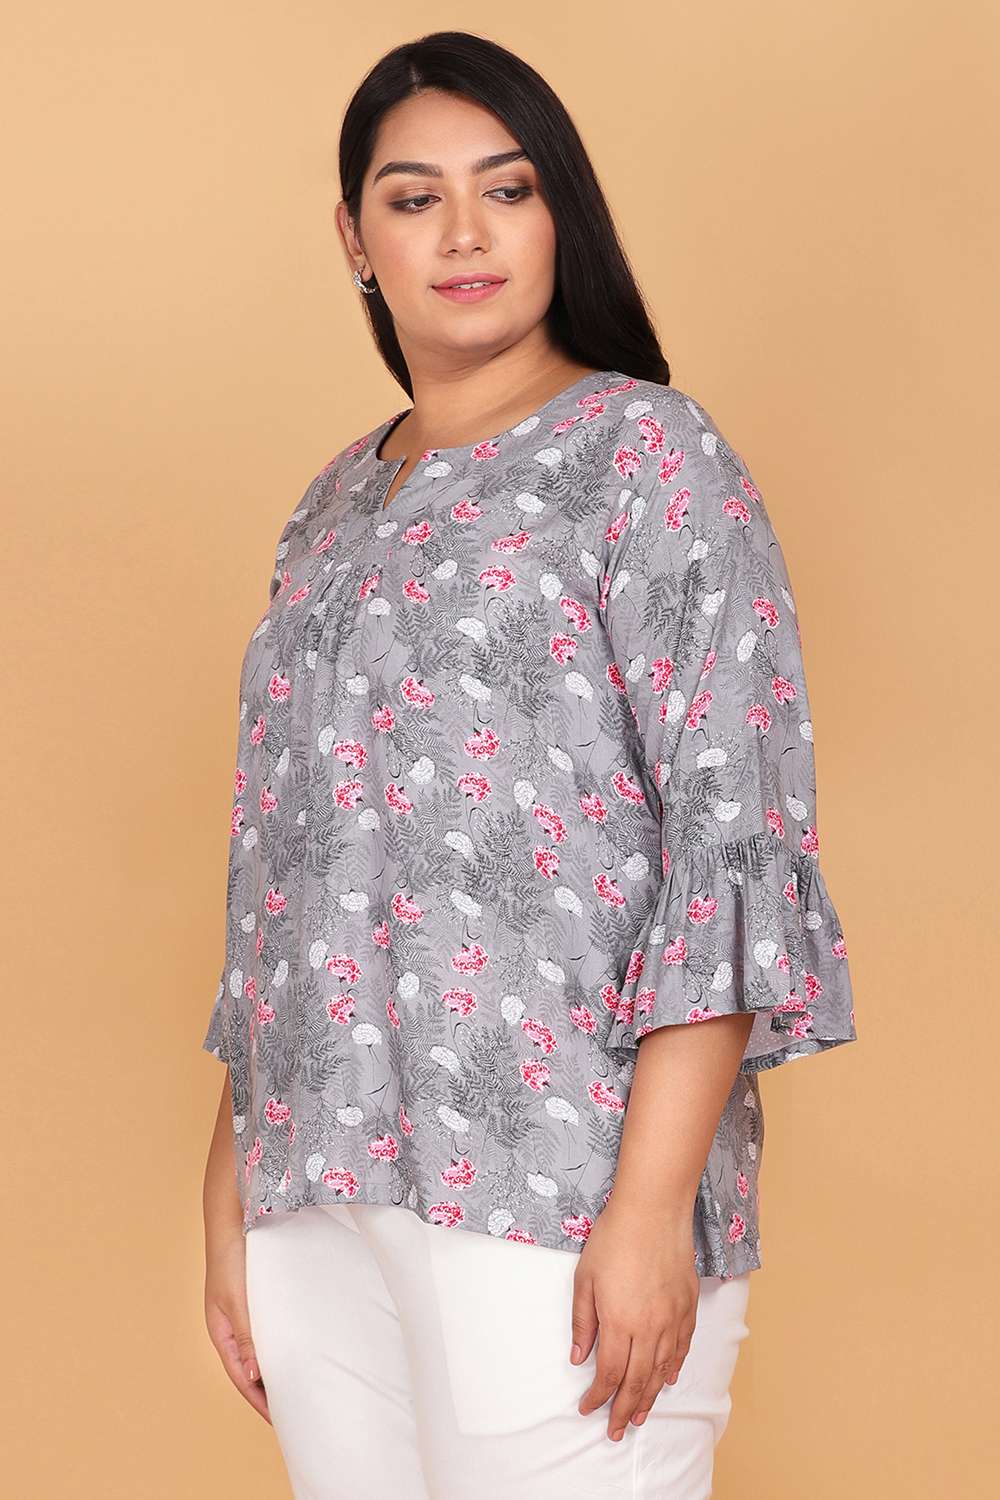 LASTINCH Western Grey Floral Printed Top Available XXS-8XL